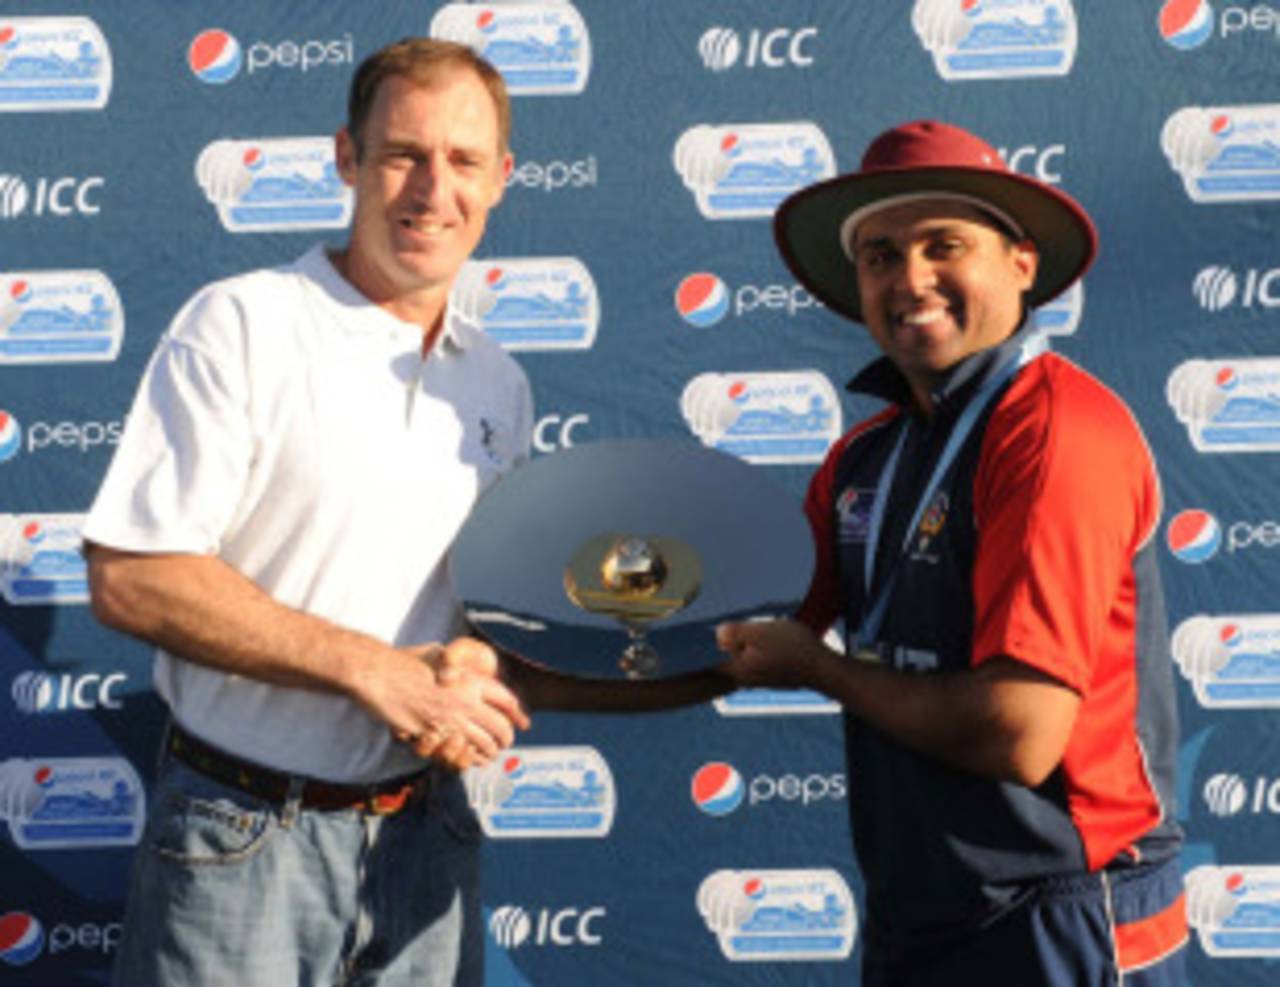 ICC and Bermuda Cricket director Neil Speight presents the WCL Division 7 trophy to Hisham Mirza, Kuwait v Nigeria , World Cricket League Division 7 Final, Gaborone, May 8, 2011